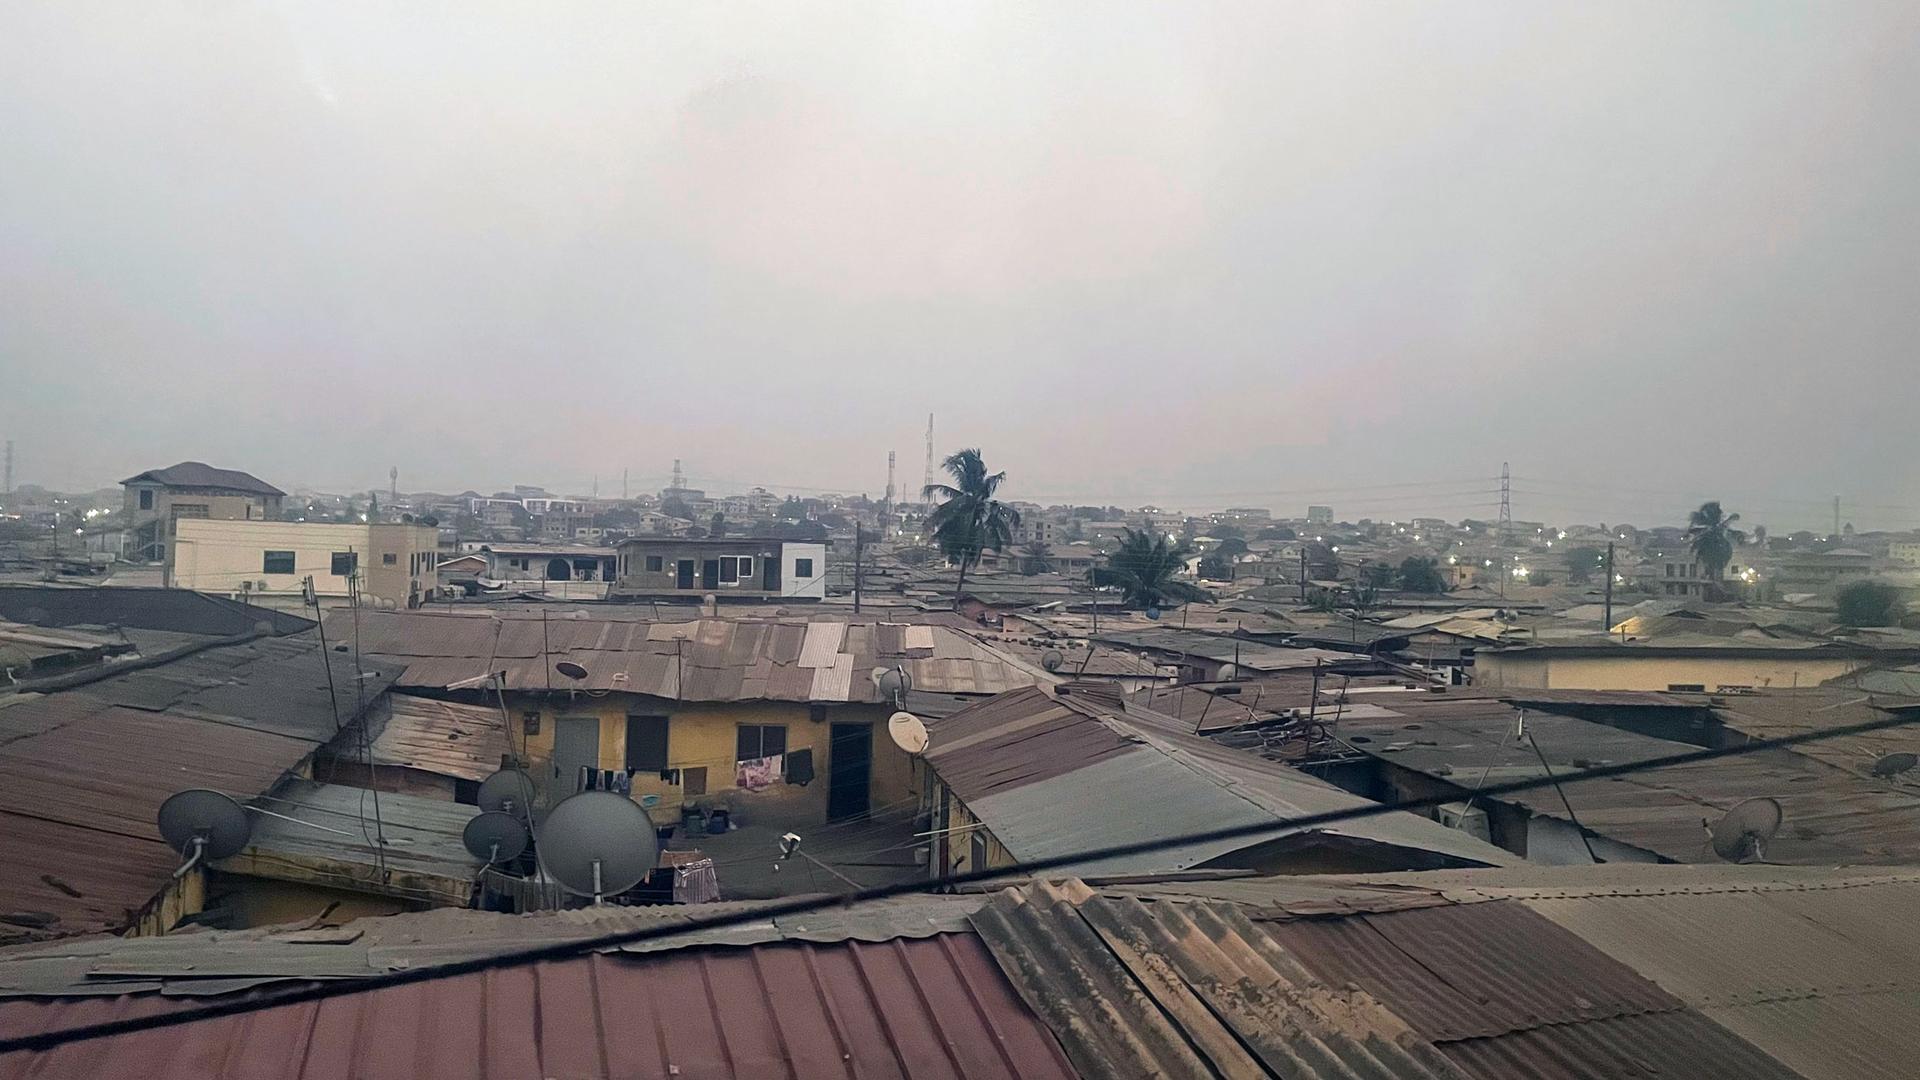 Air quality levels have been bad in Accra since December as harmattan season kicks in across Ghana. The data coming in shows the situation is not improving.